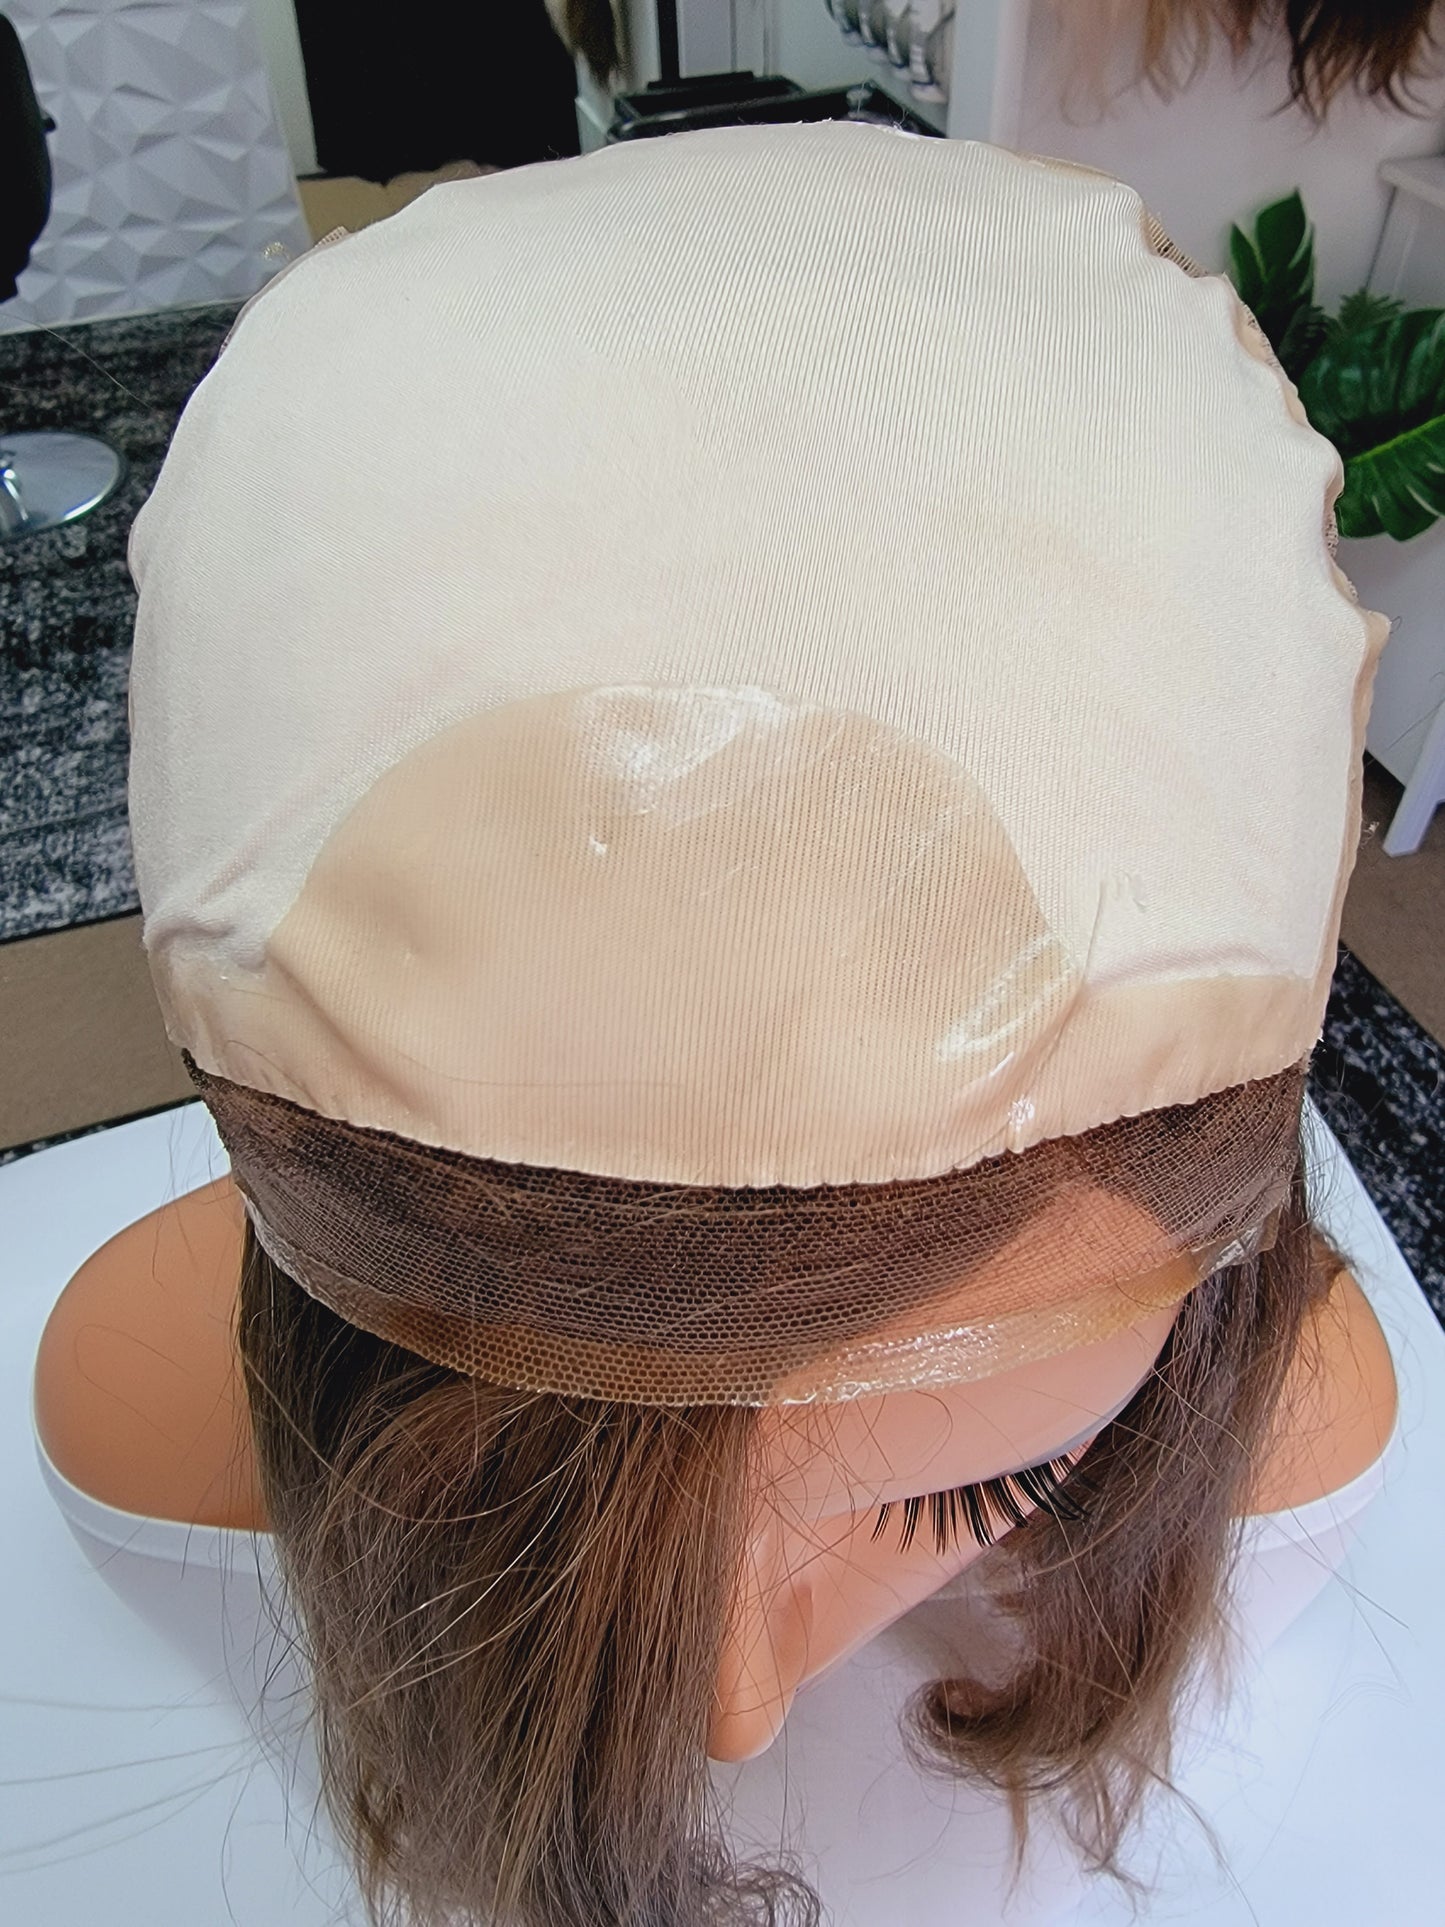 Premium Quality Medical Wig Unit. Light Brown with Carmel Highlights